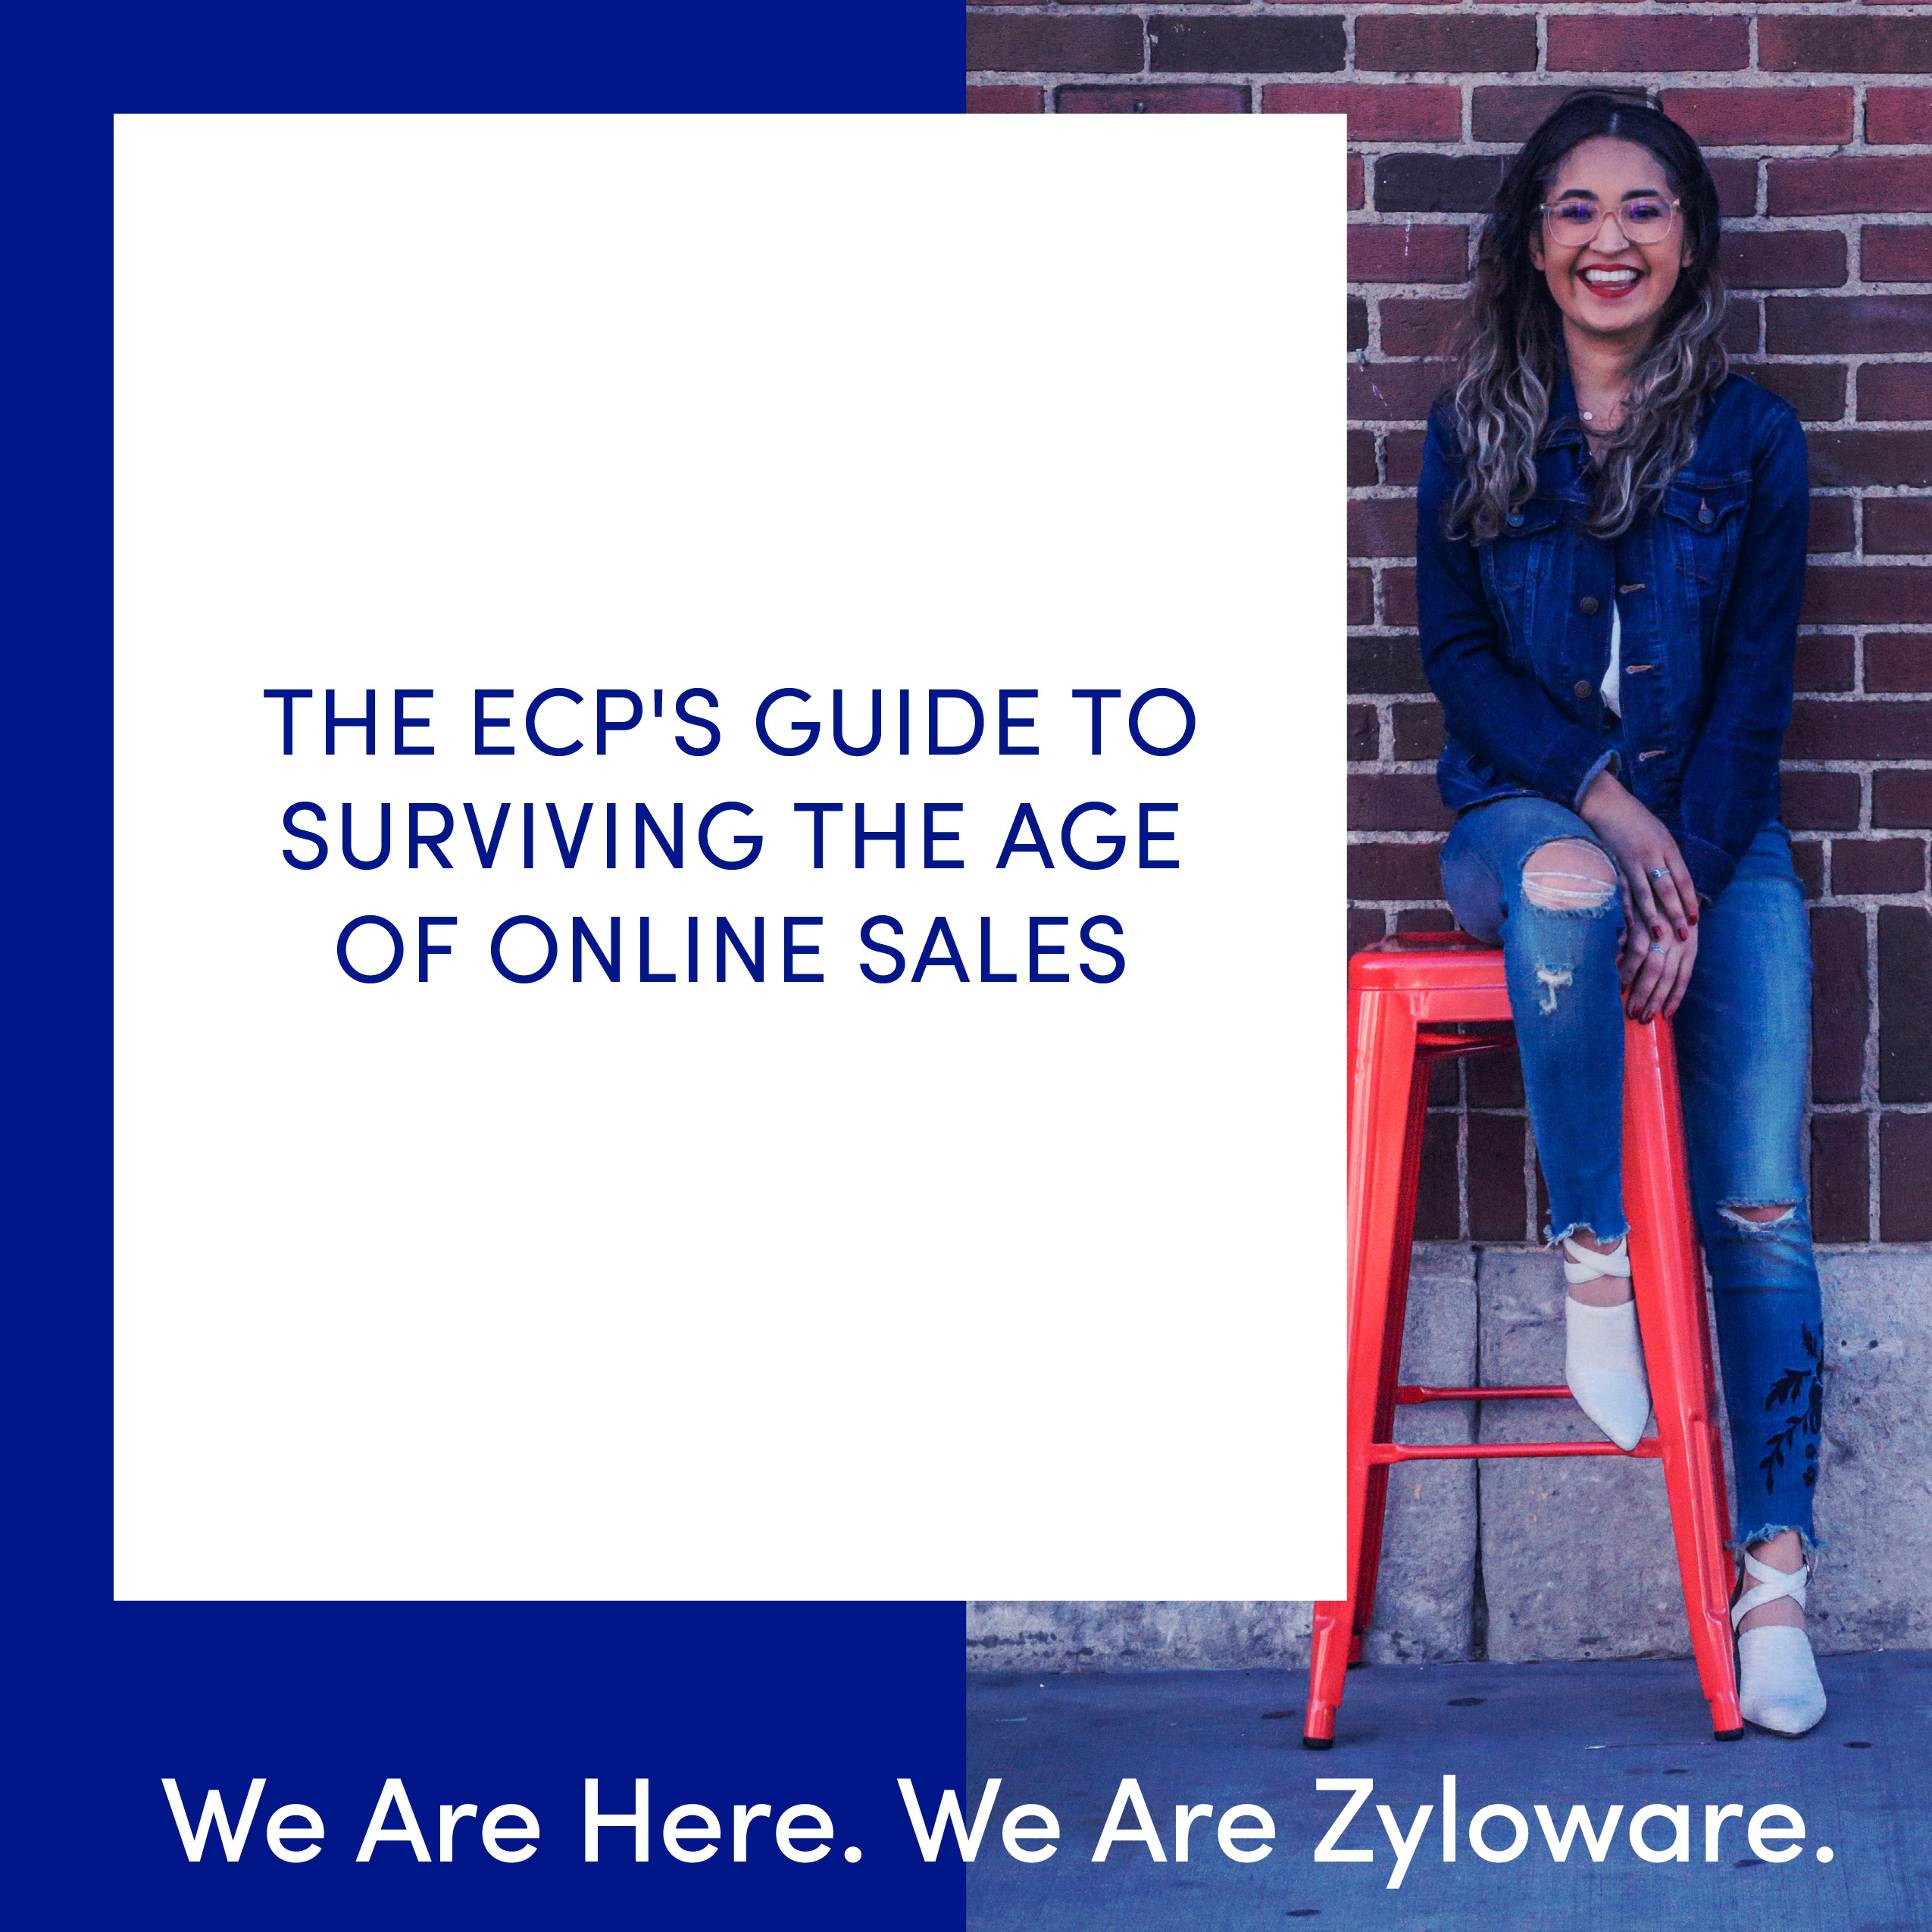 ECP's Guide to Surviving Online Sales